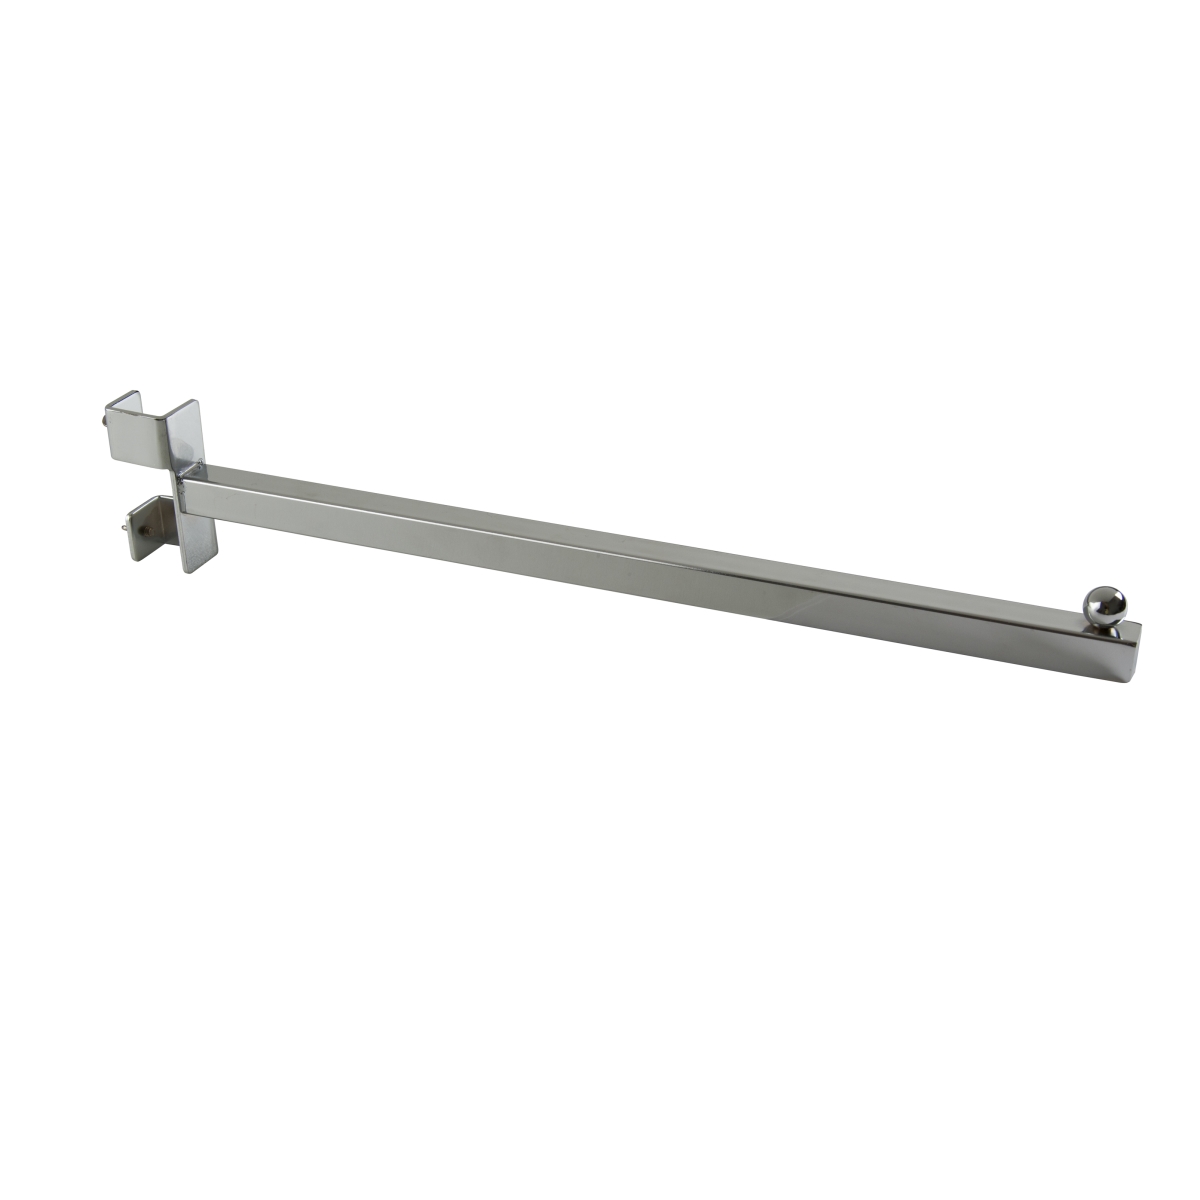 Picture of Econoco TV-16 16 in. Twist-On Straight Arm for 4-Way Square Tubing Rack - Chrome